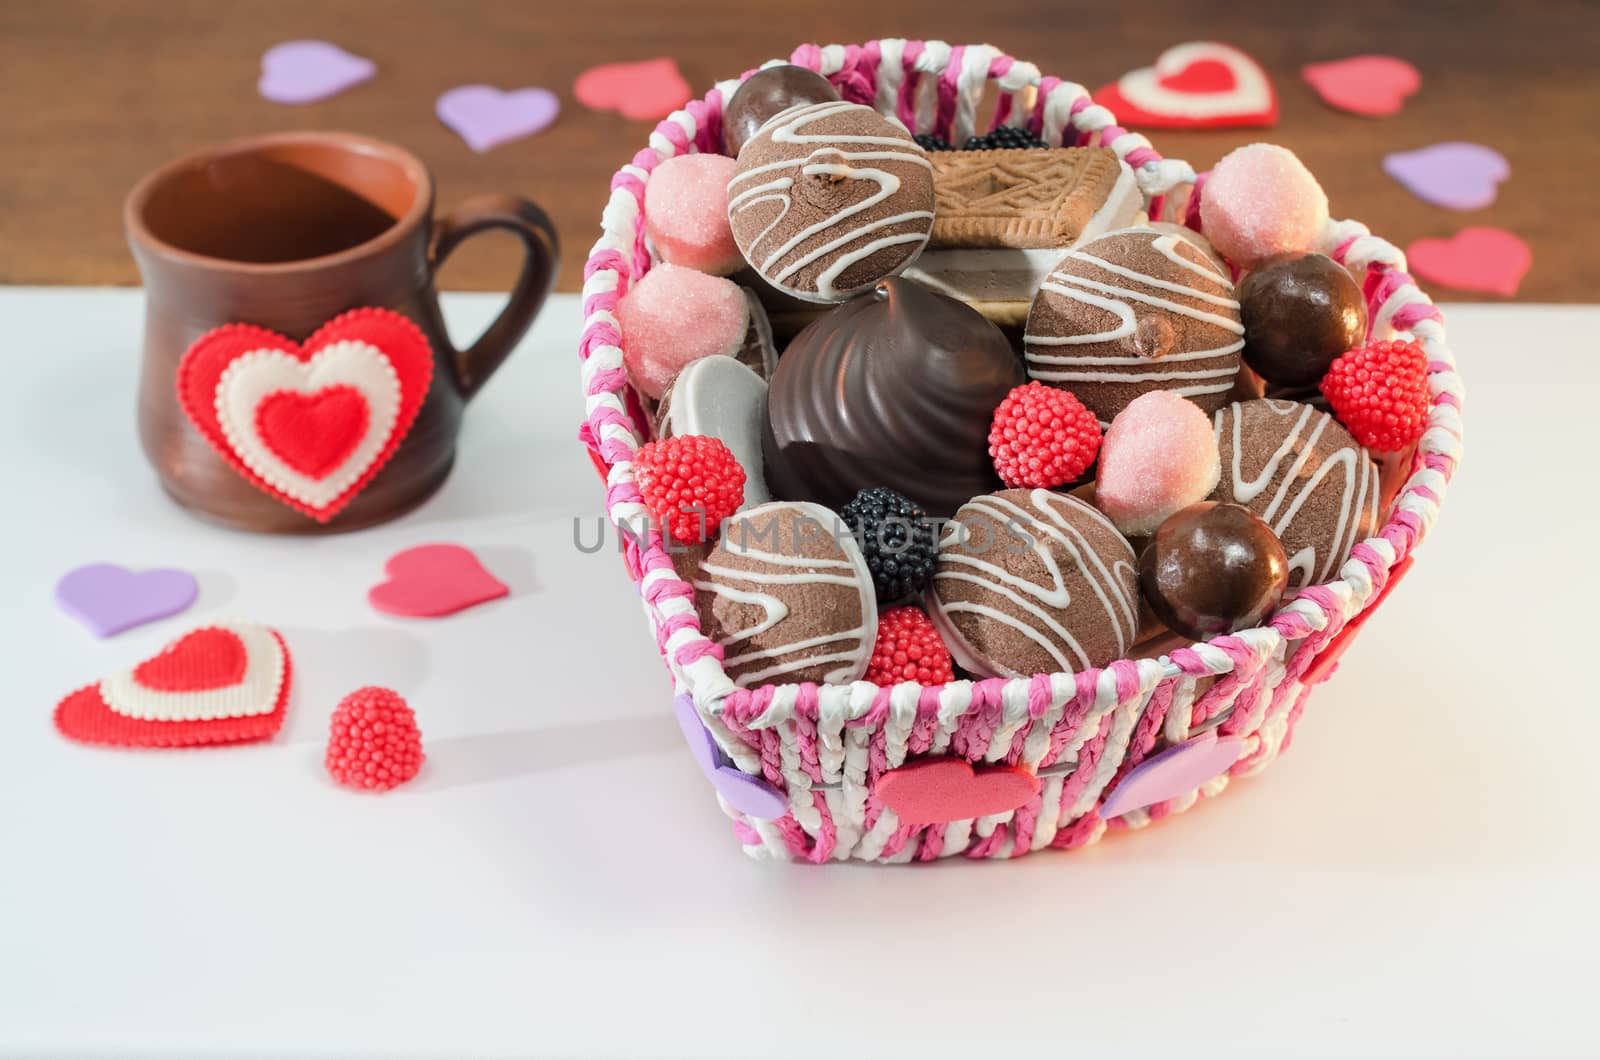 Basket with various sweets and biscuits on the table, decorative Valentine day heart. Selective focus.